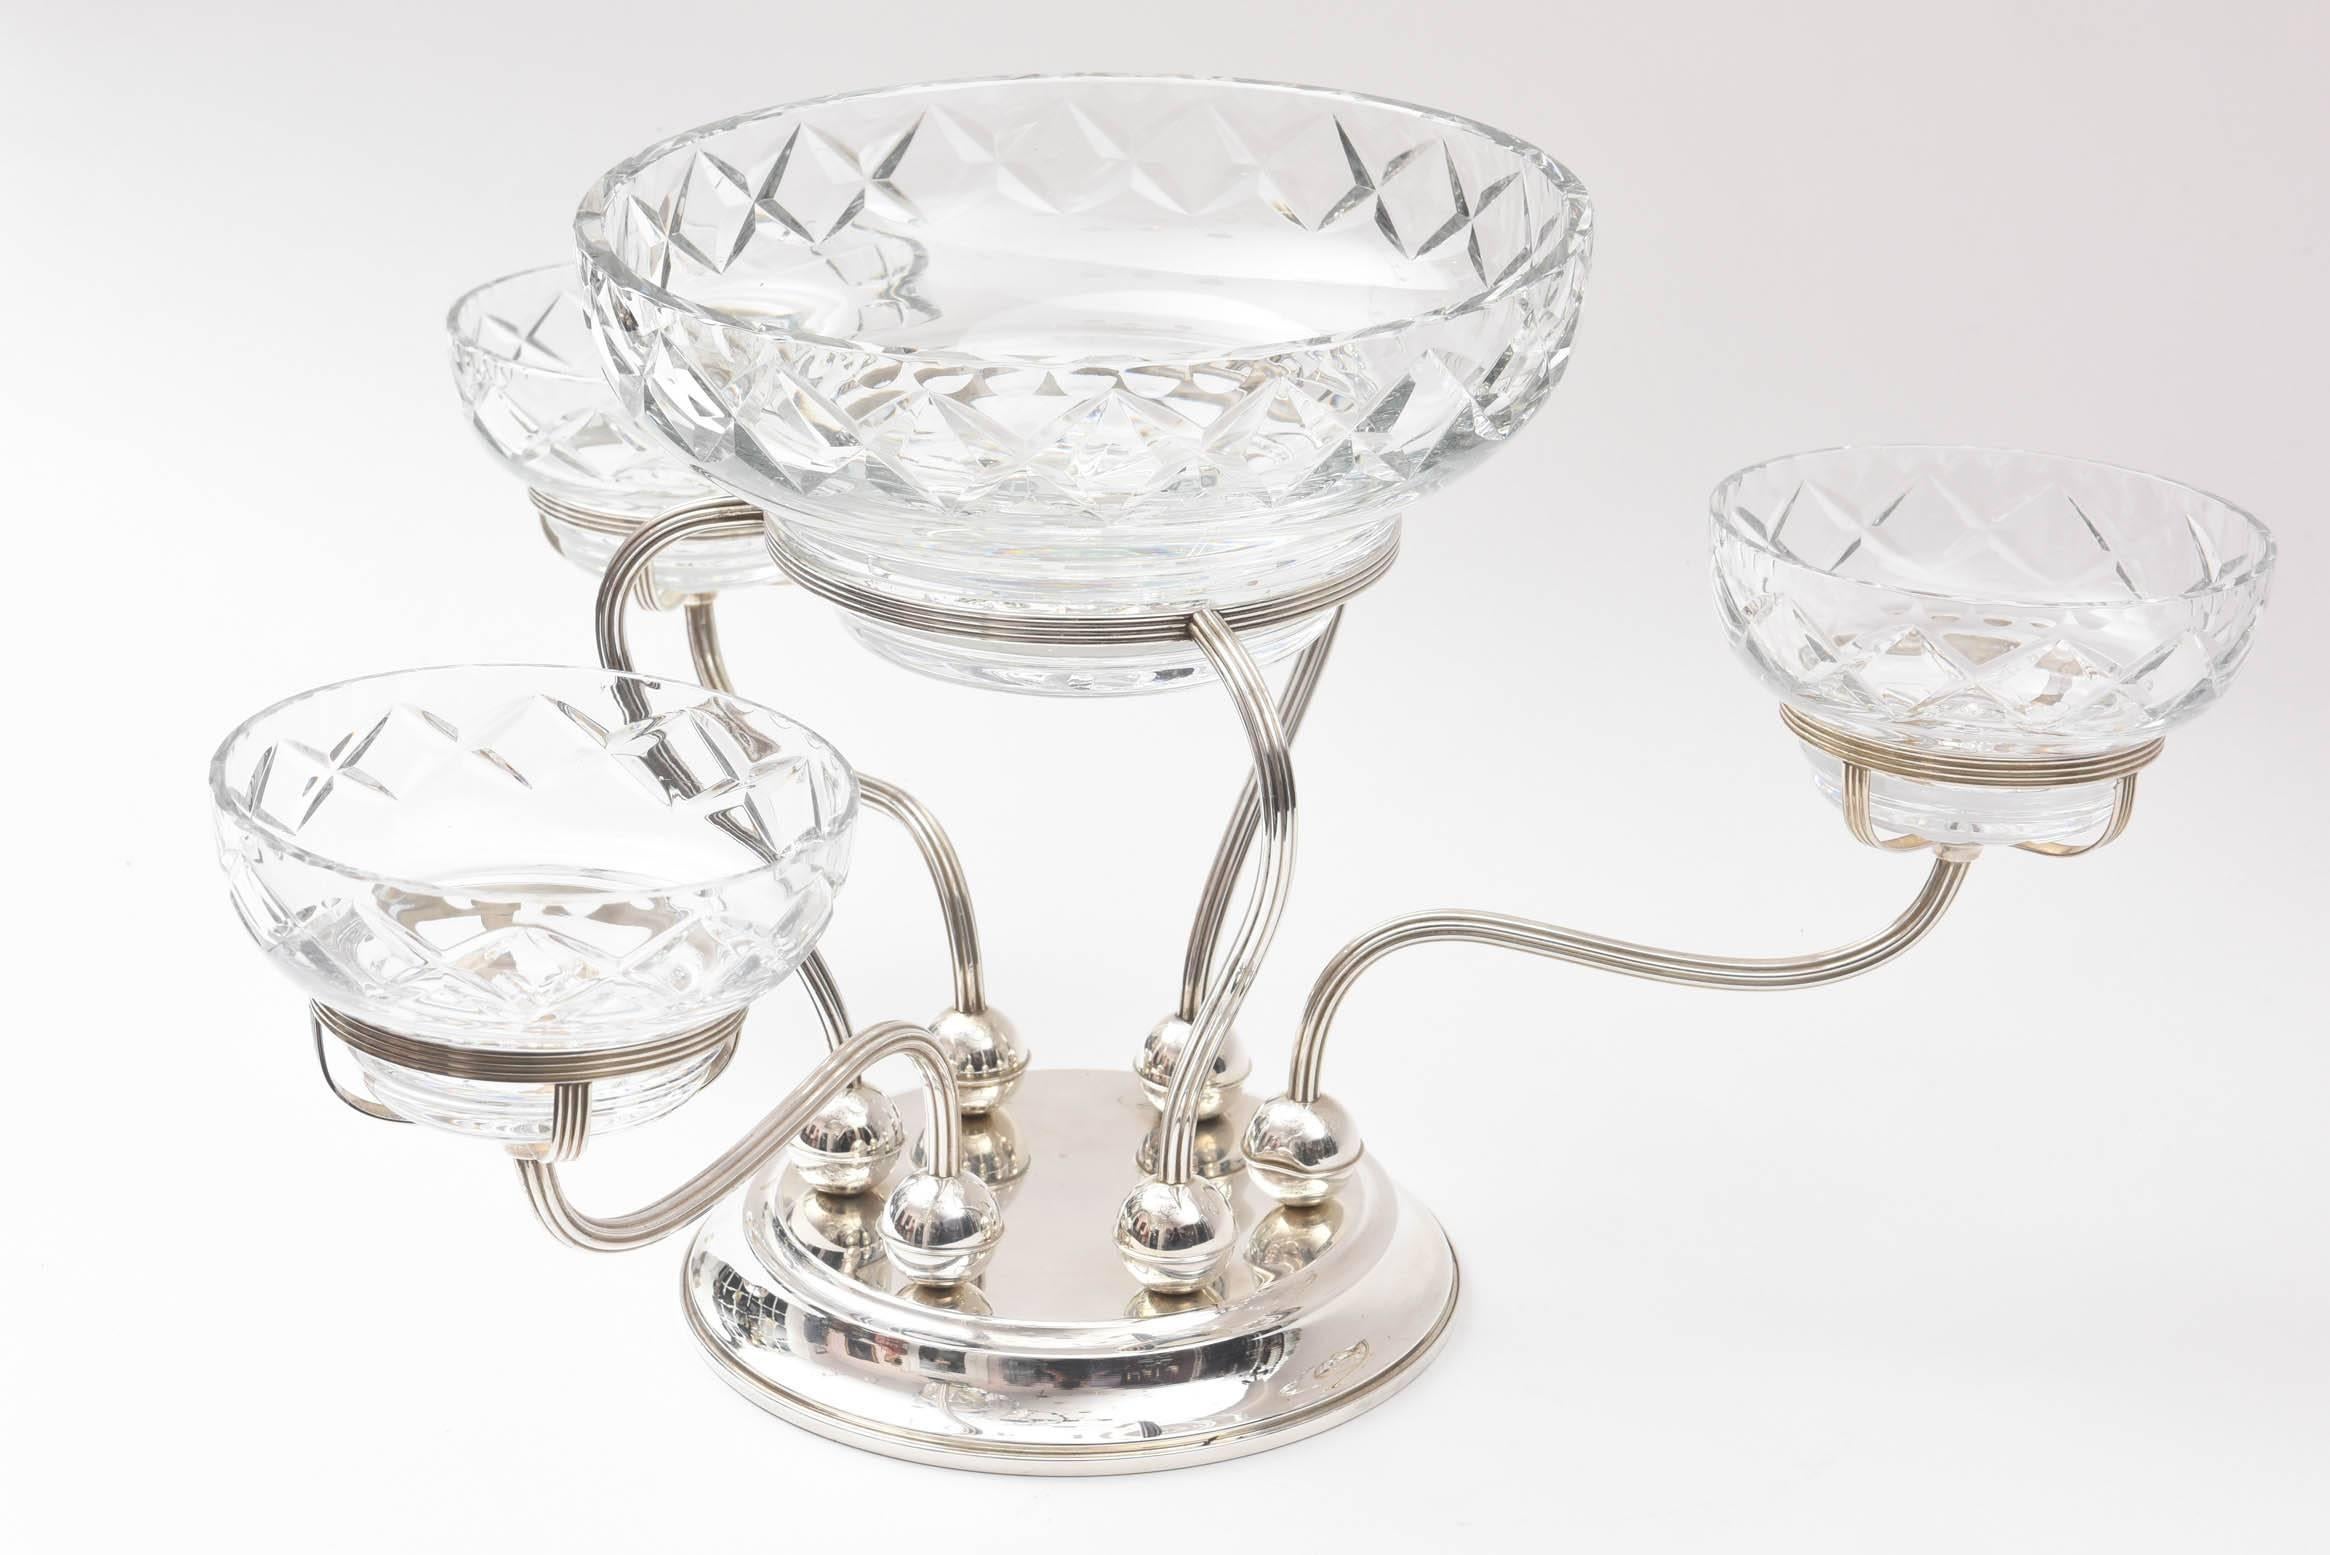 An elegant centrepiece from one of America's storied silversmith's: Gorham. This classic piece features cut crystal bowls which nestle on top of hand chased metal arms. An unique base supports the epergne and comes apart for easy polishing and